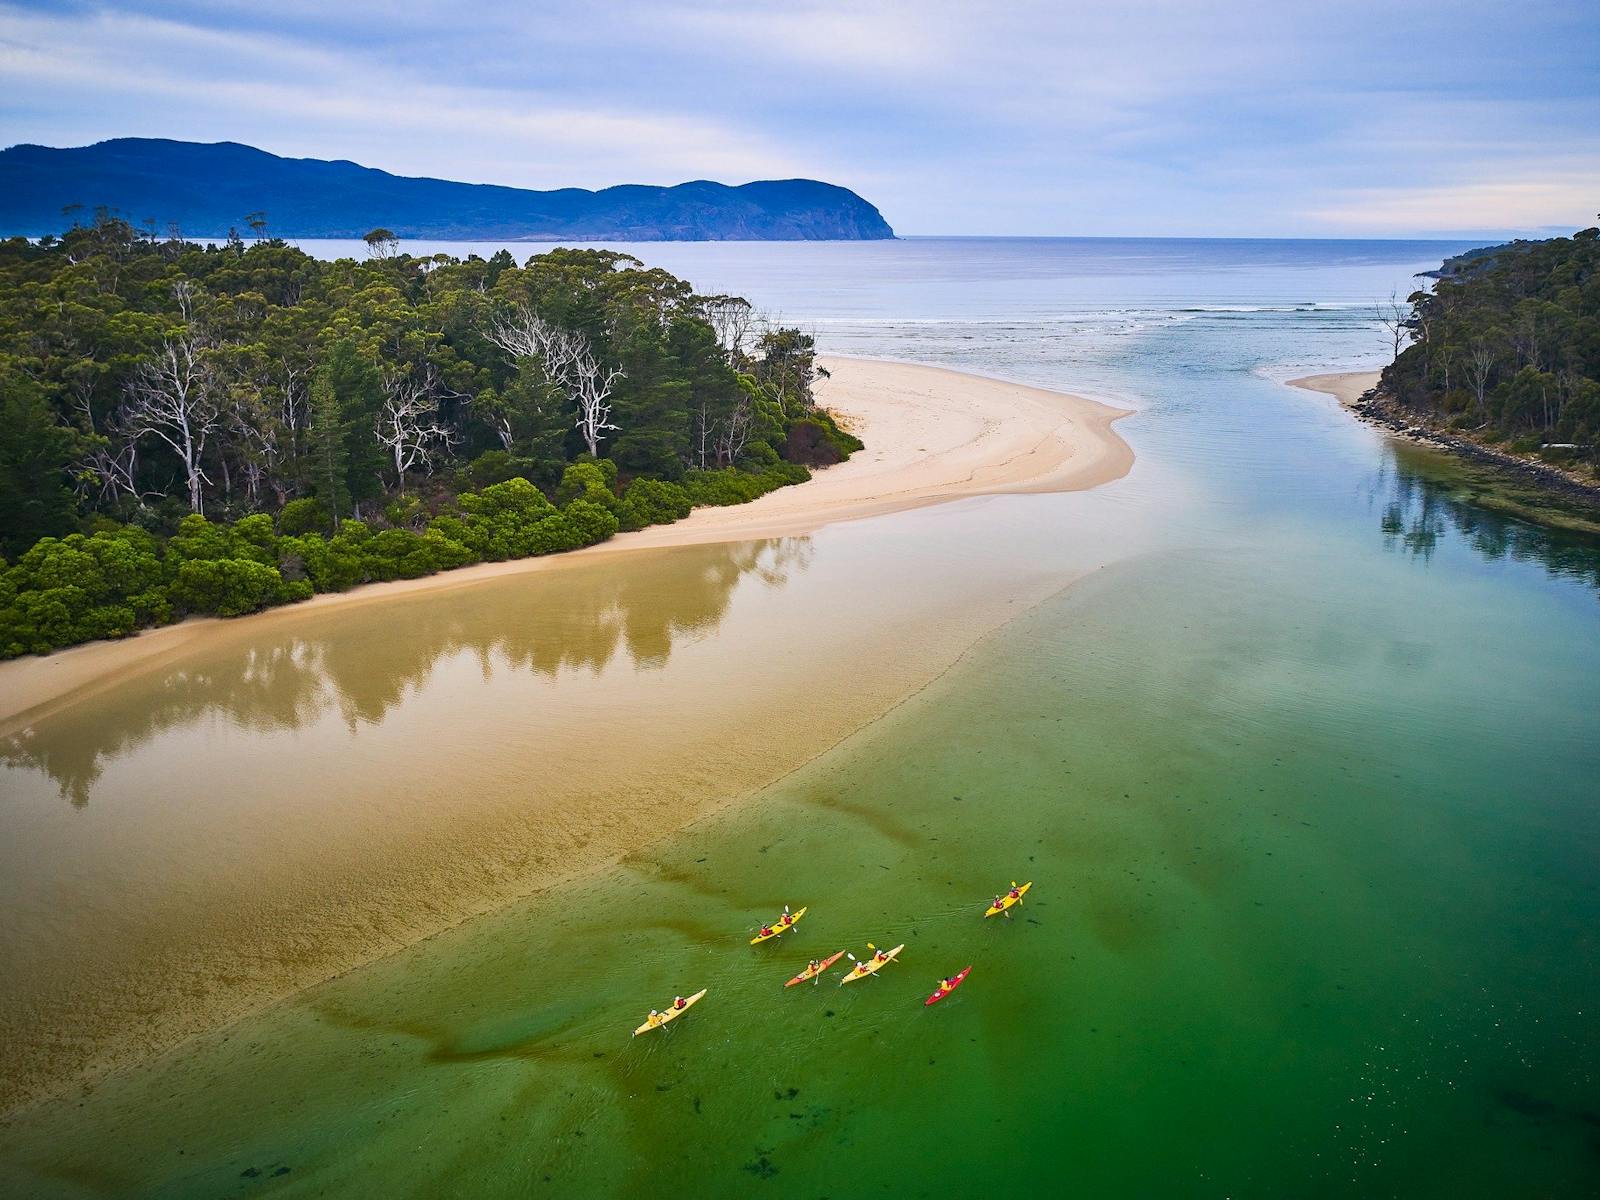 Dreamy paddling conditions on Bruny Island